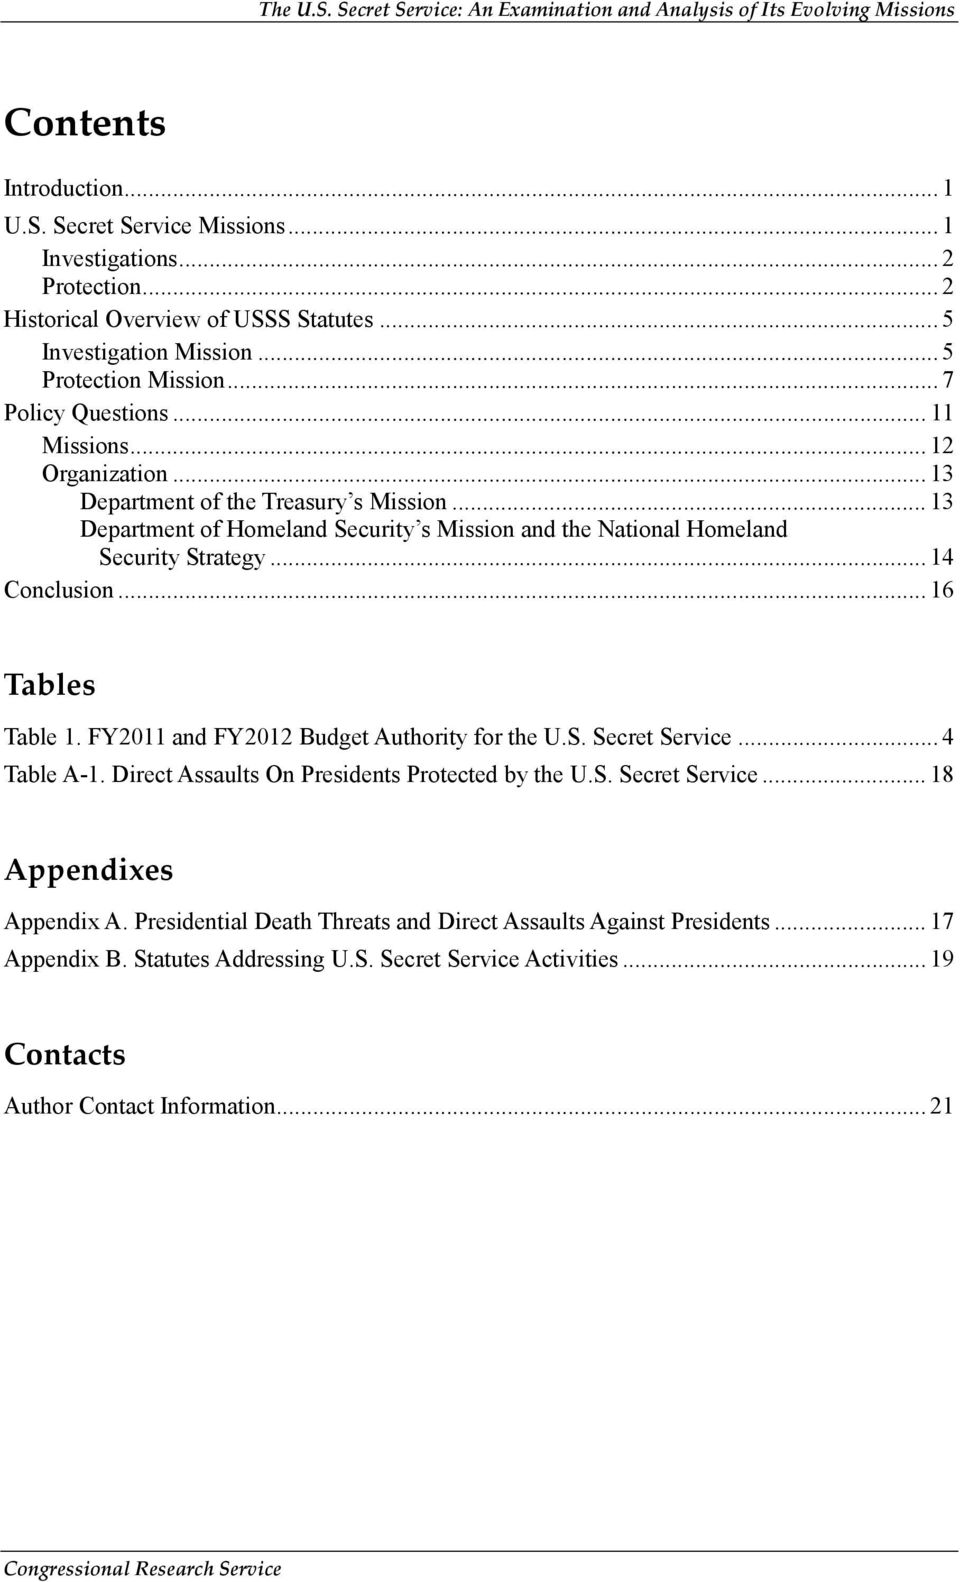 .. 14 Conclusion... 16 Tables Table 1. FY2011 and FY2012 Budget Authority for the U.S. Secret Service... 4 Table A-1. Direct Assaults On Presidents Protected by the U.S. Secret Service... 18 Appendixes Appendix A.